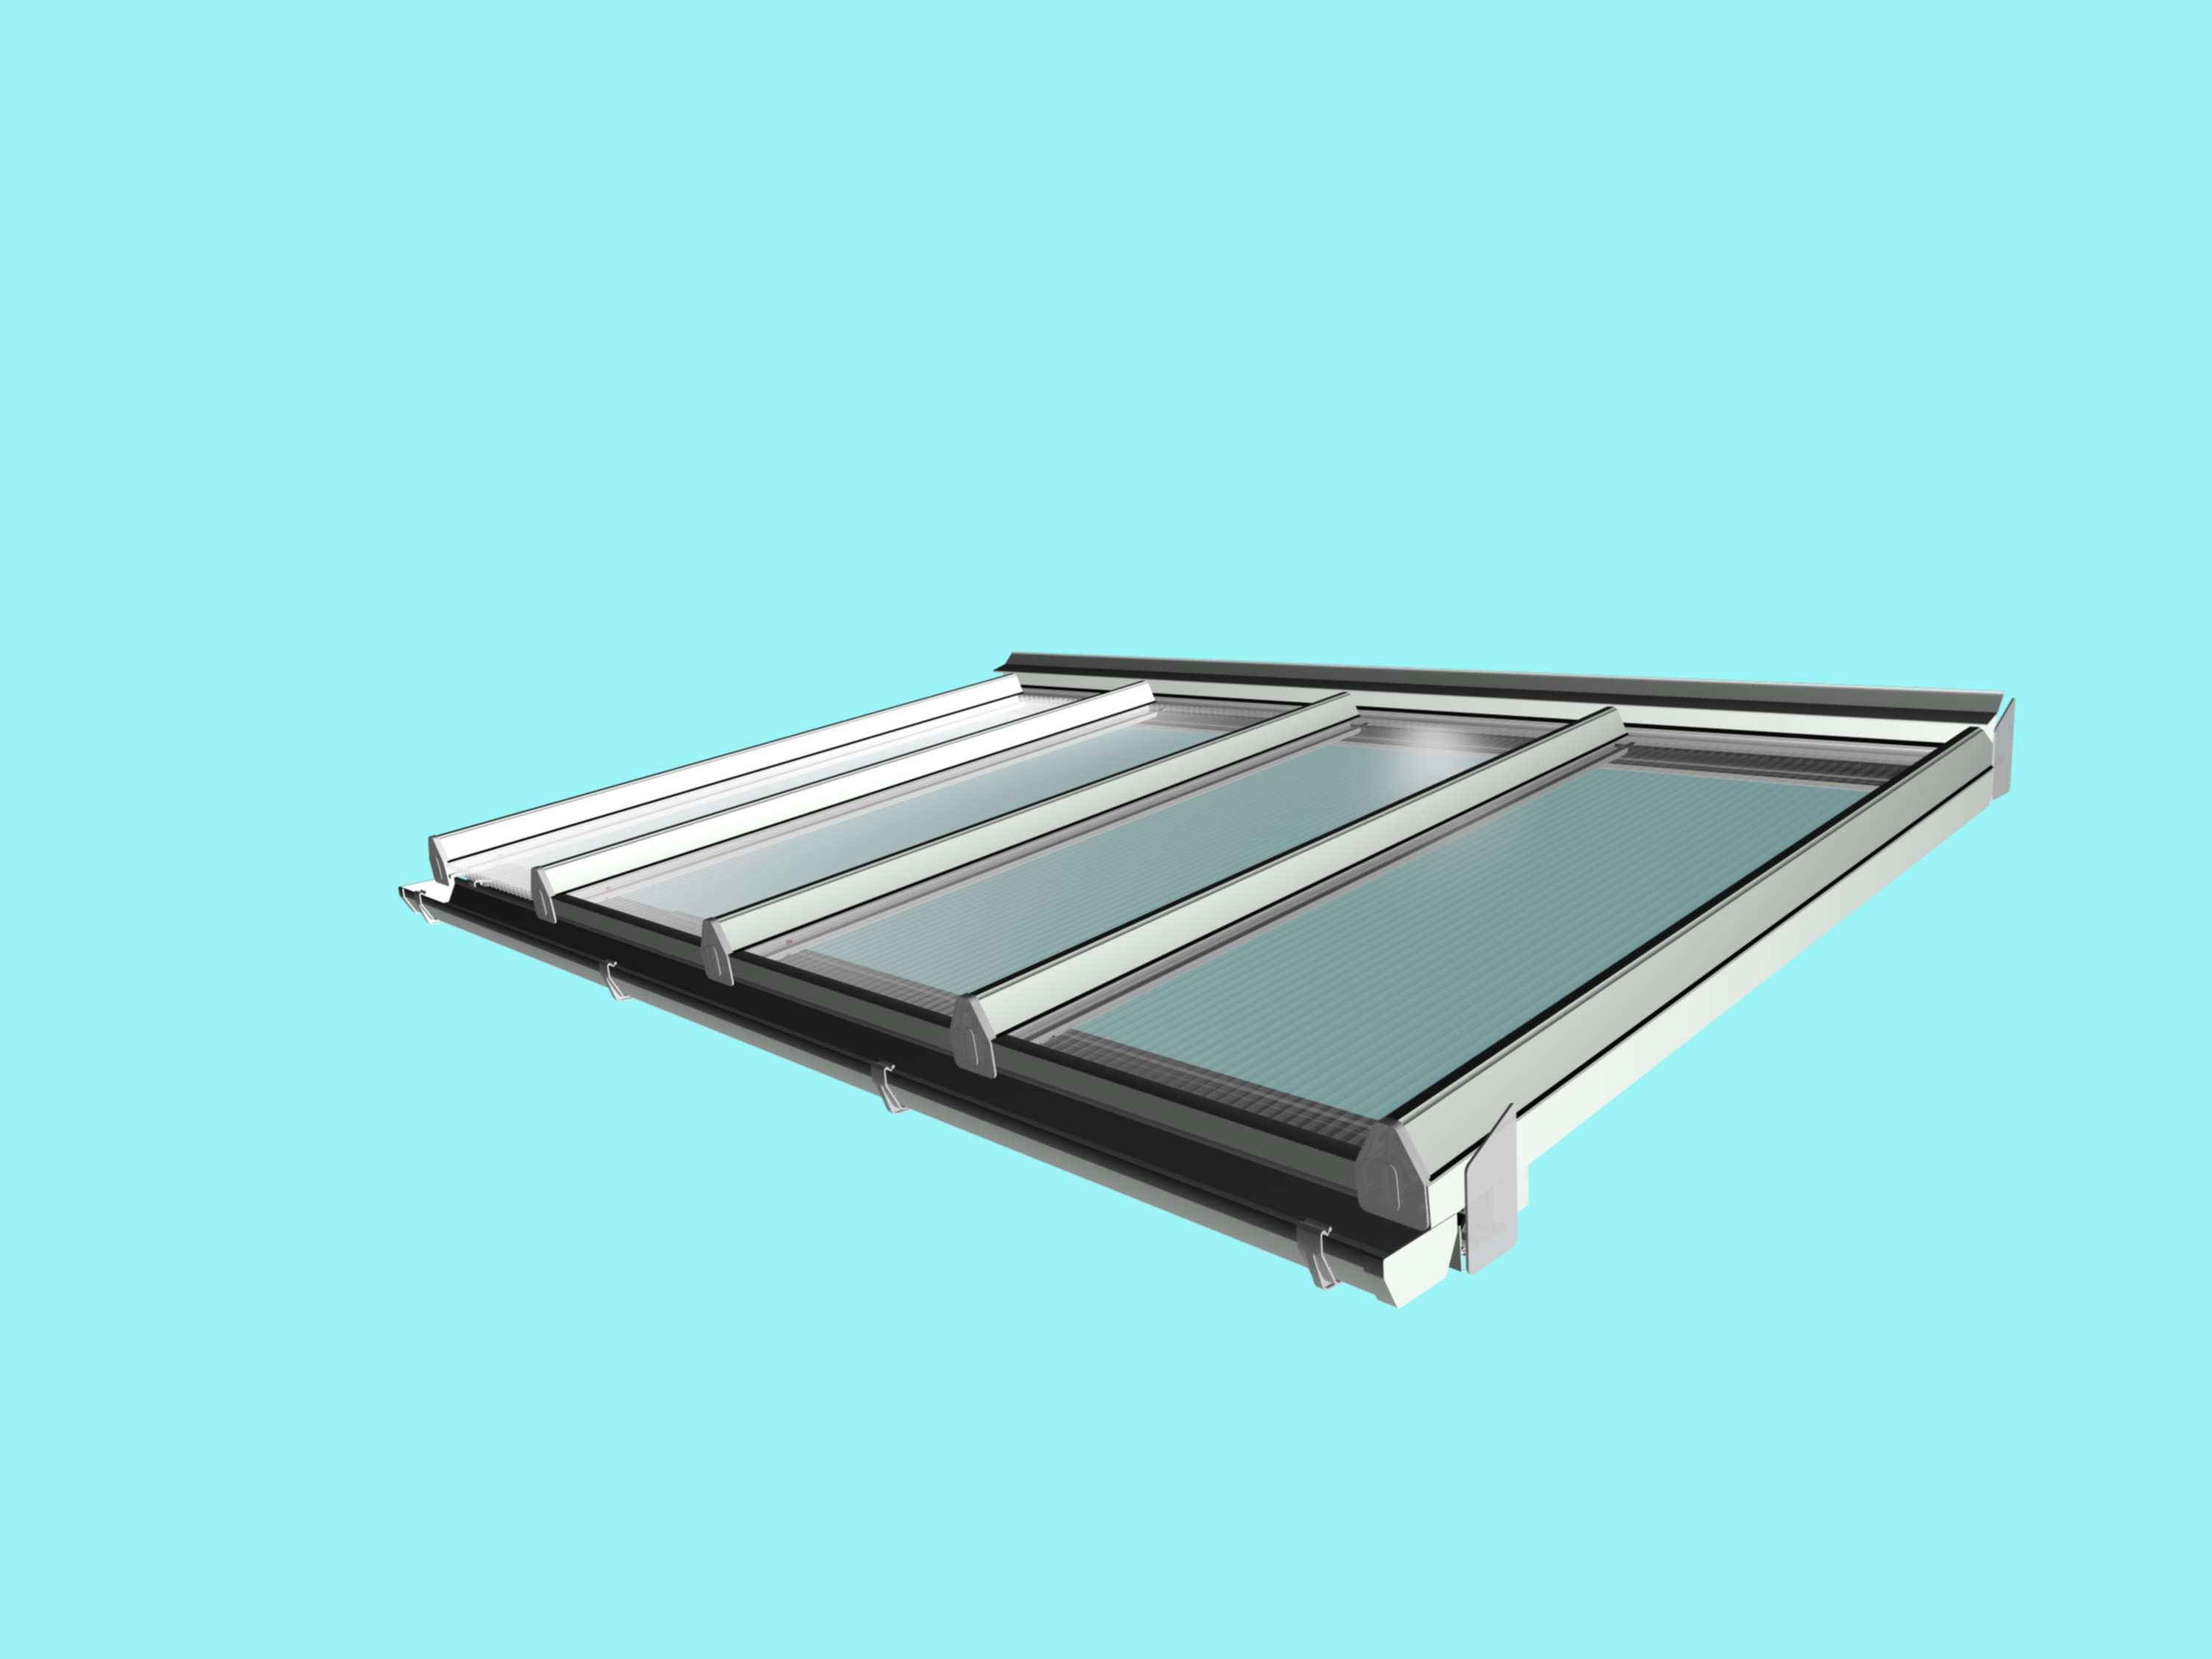 Self-Supporting DIY Conservatory Roof Kit for 25mm polycarbonate, 6.0m wide x 2.5m Projection from Omega Build